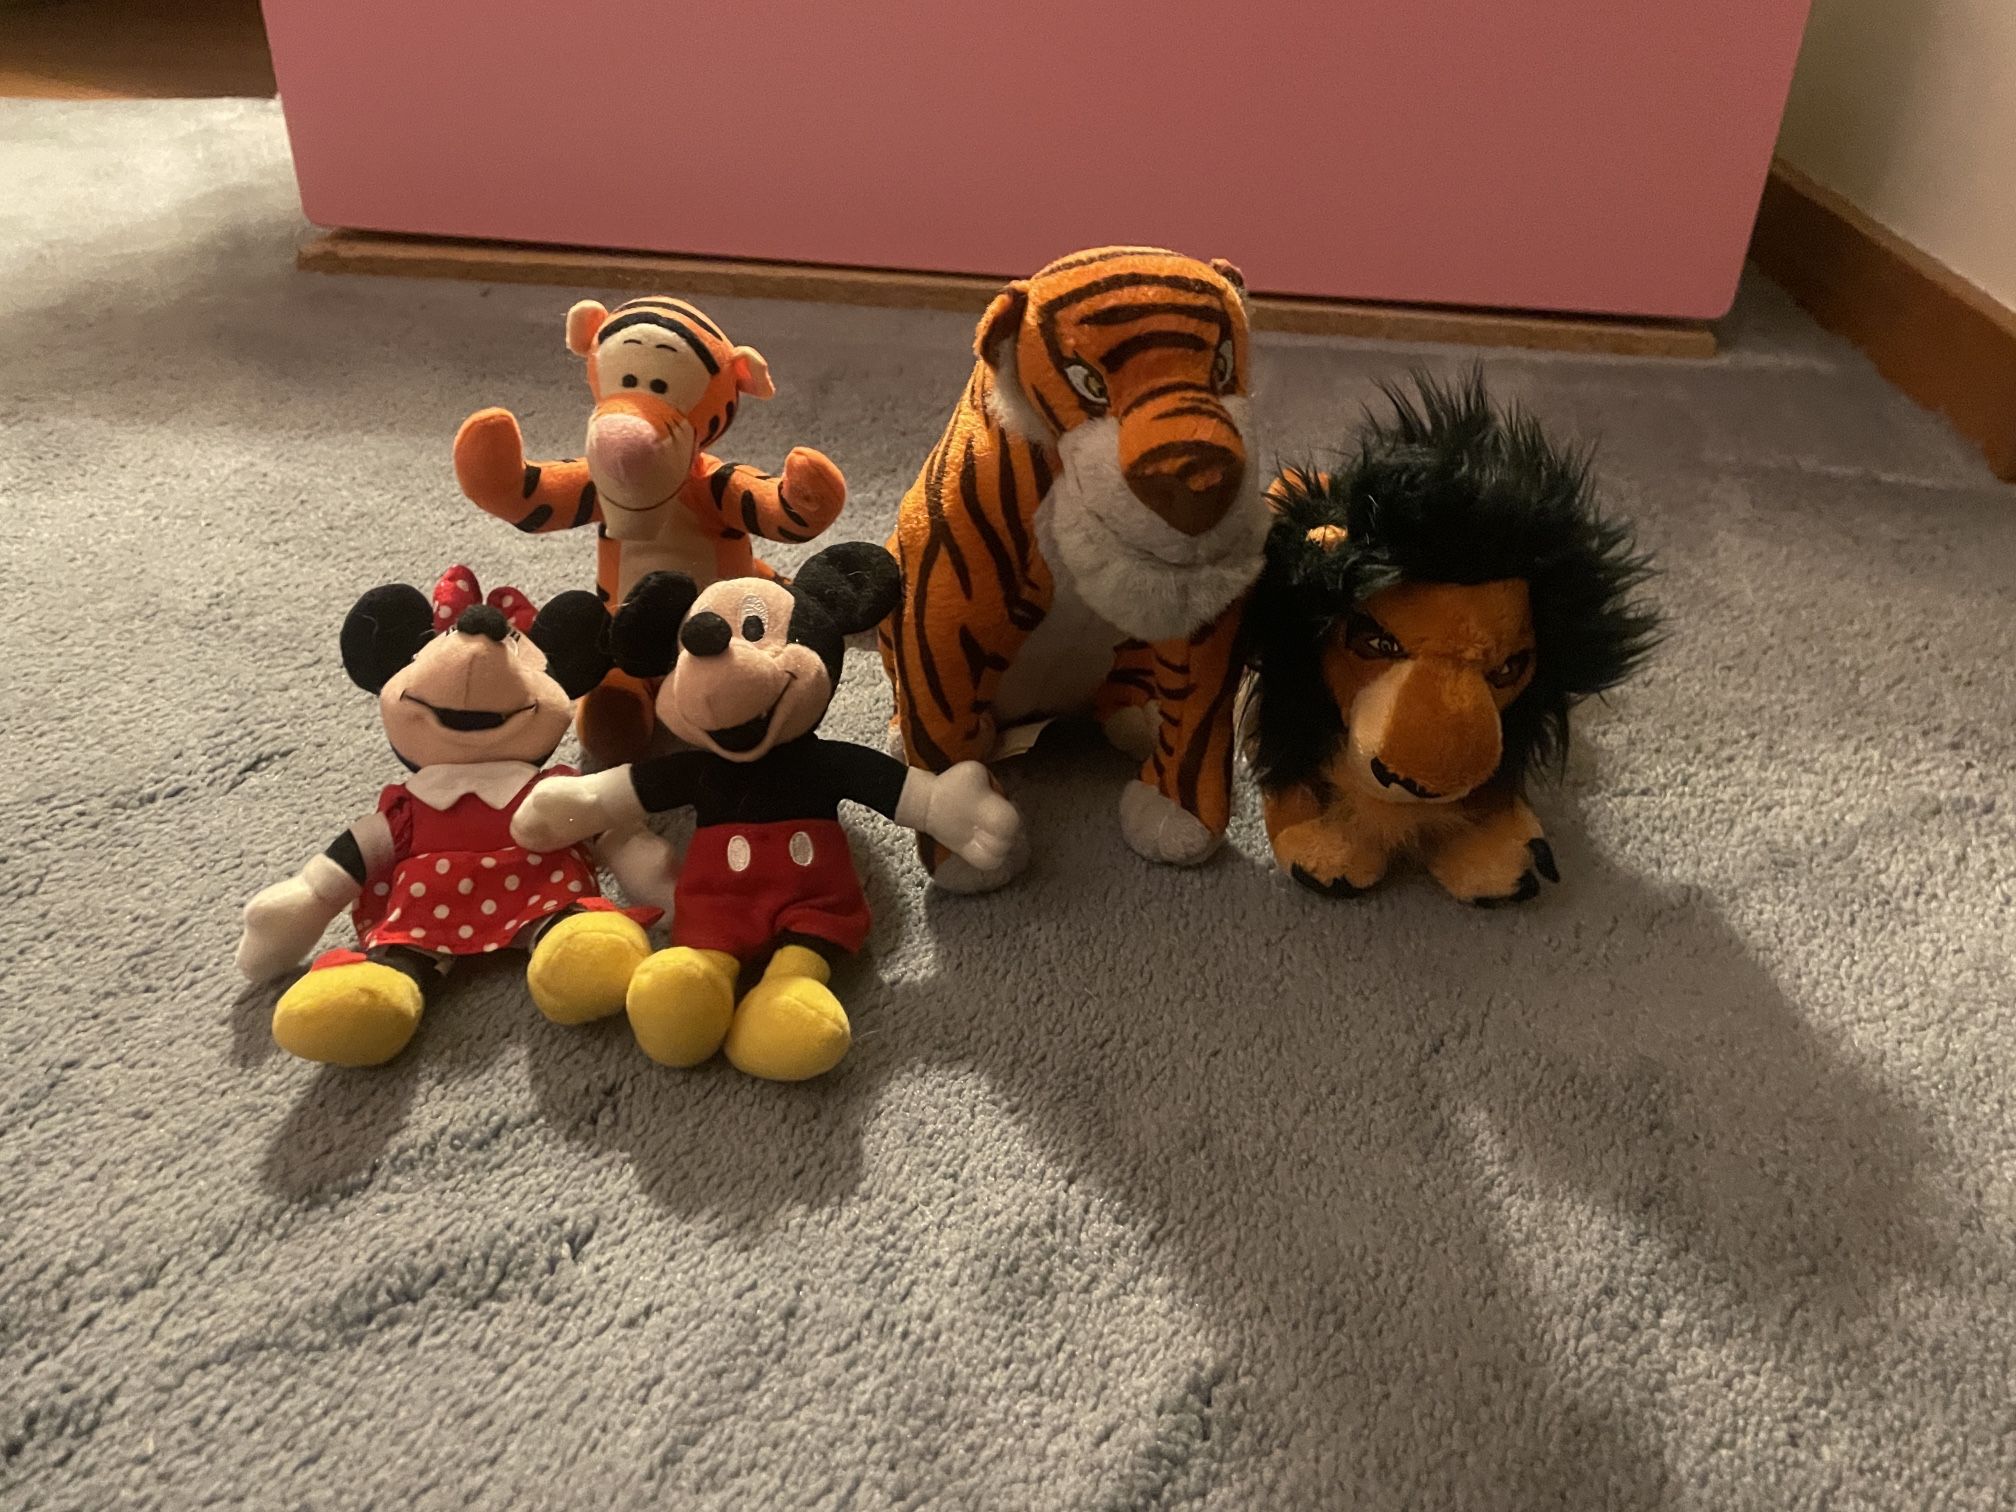 Assorted Plush Disney Characters